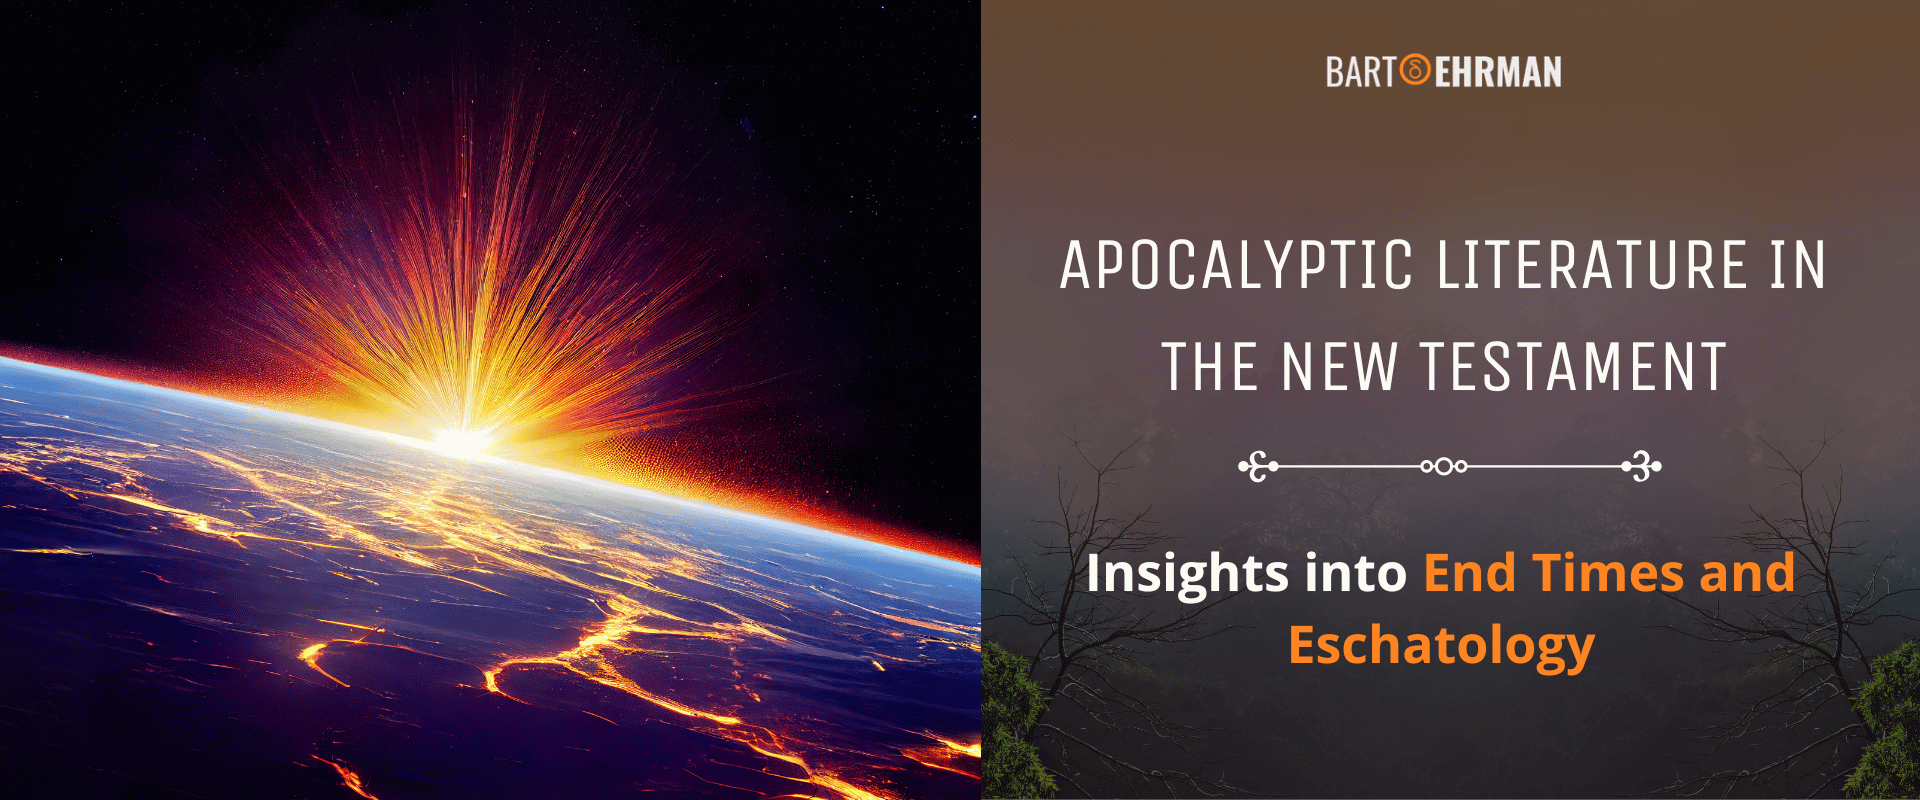 Apocalyptic Literature in the New Testament - Insights into End Times and Eschatology